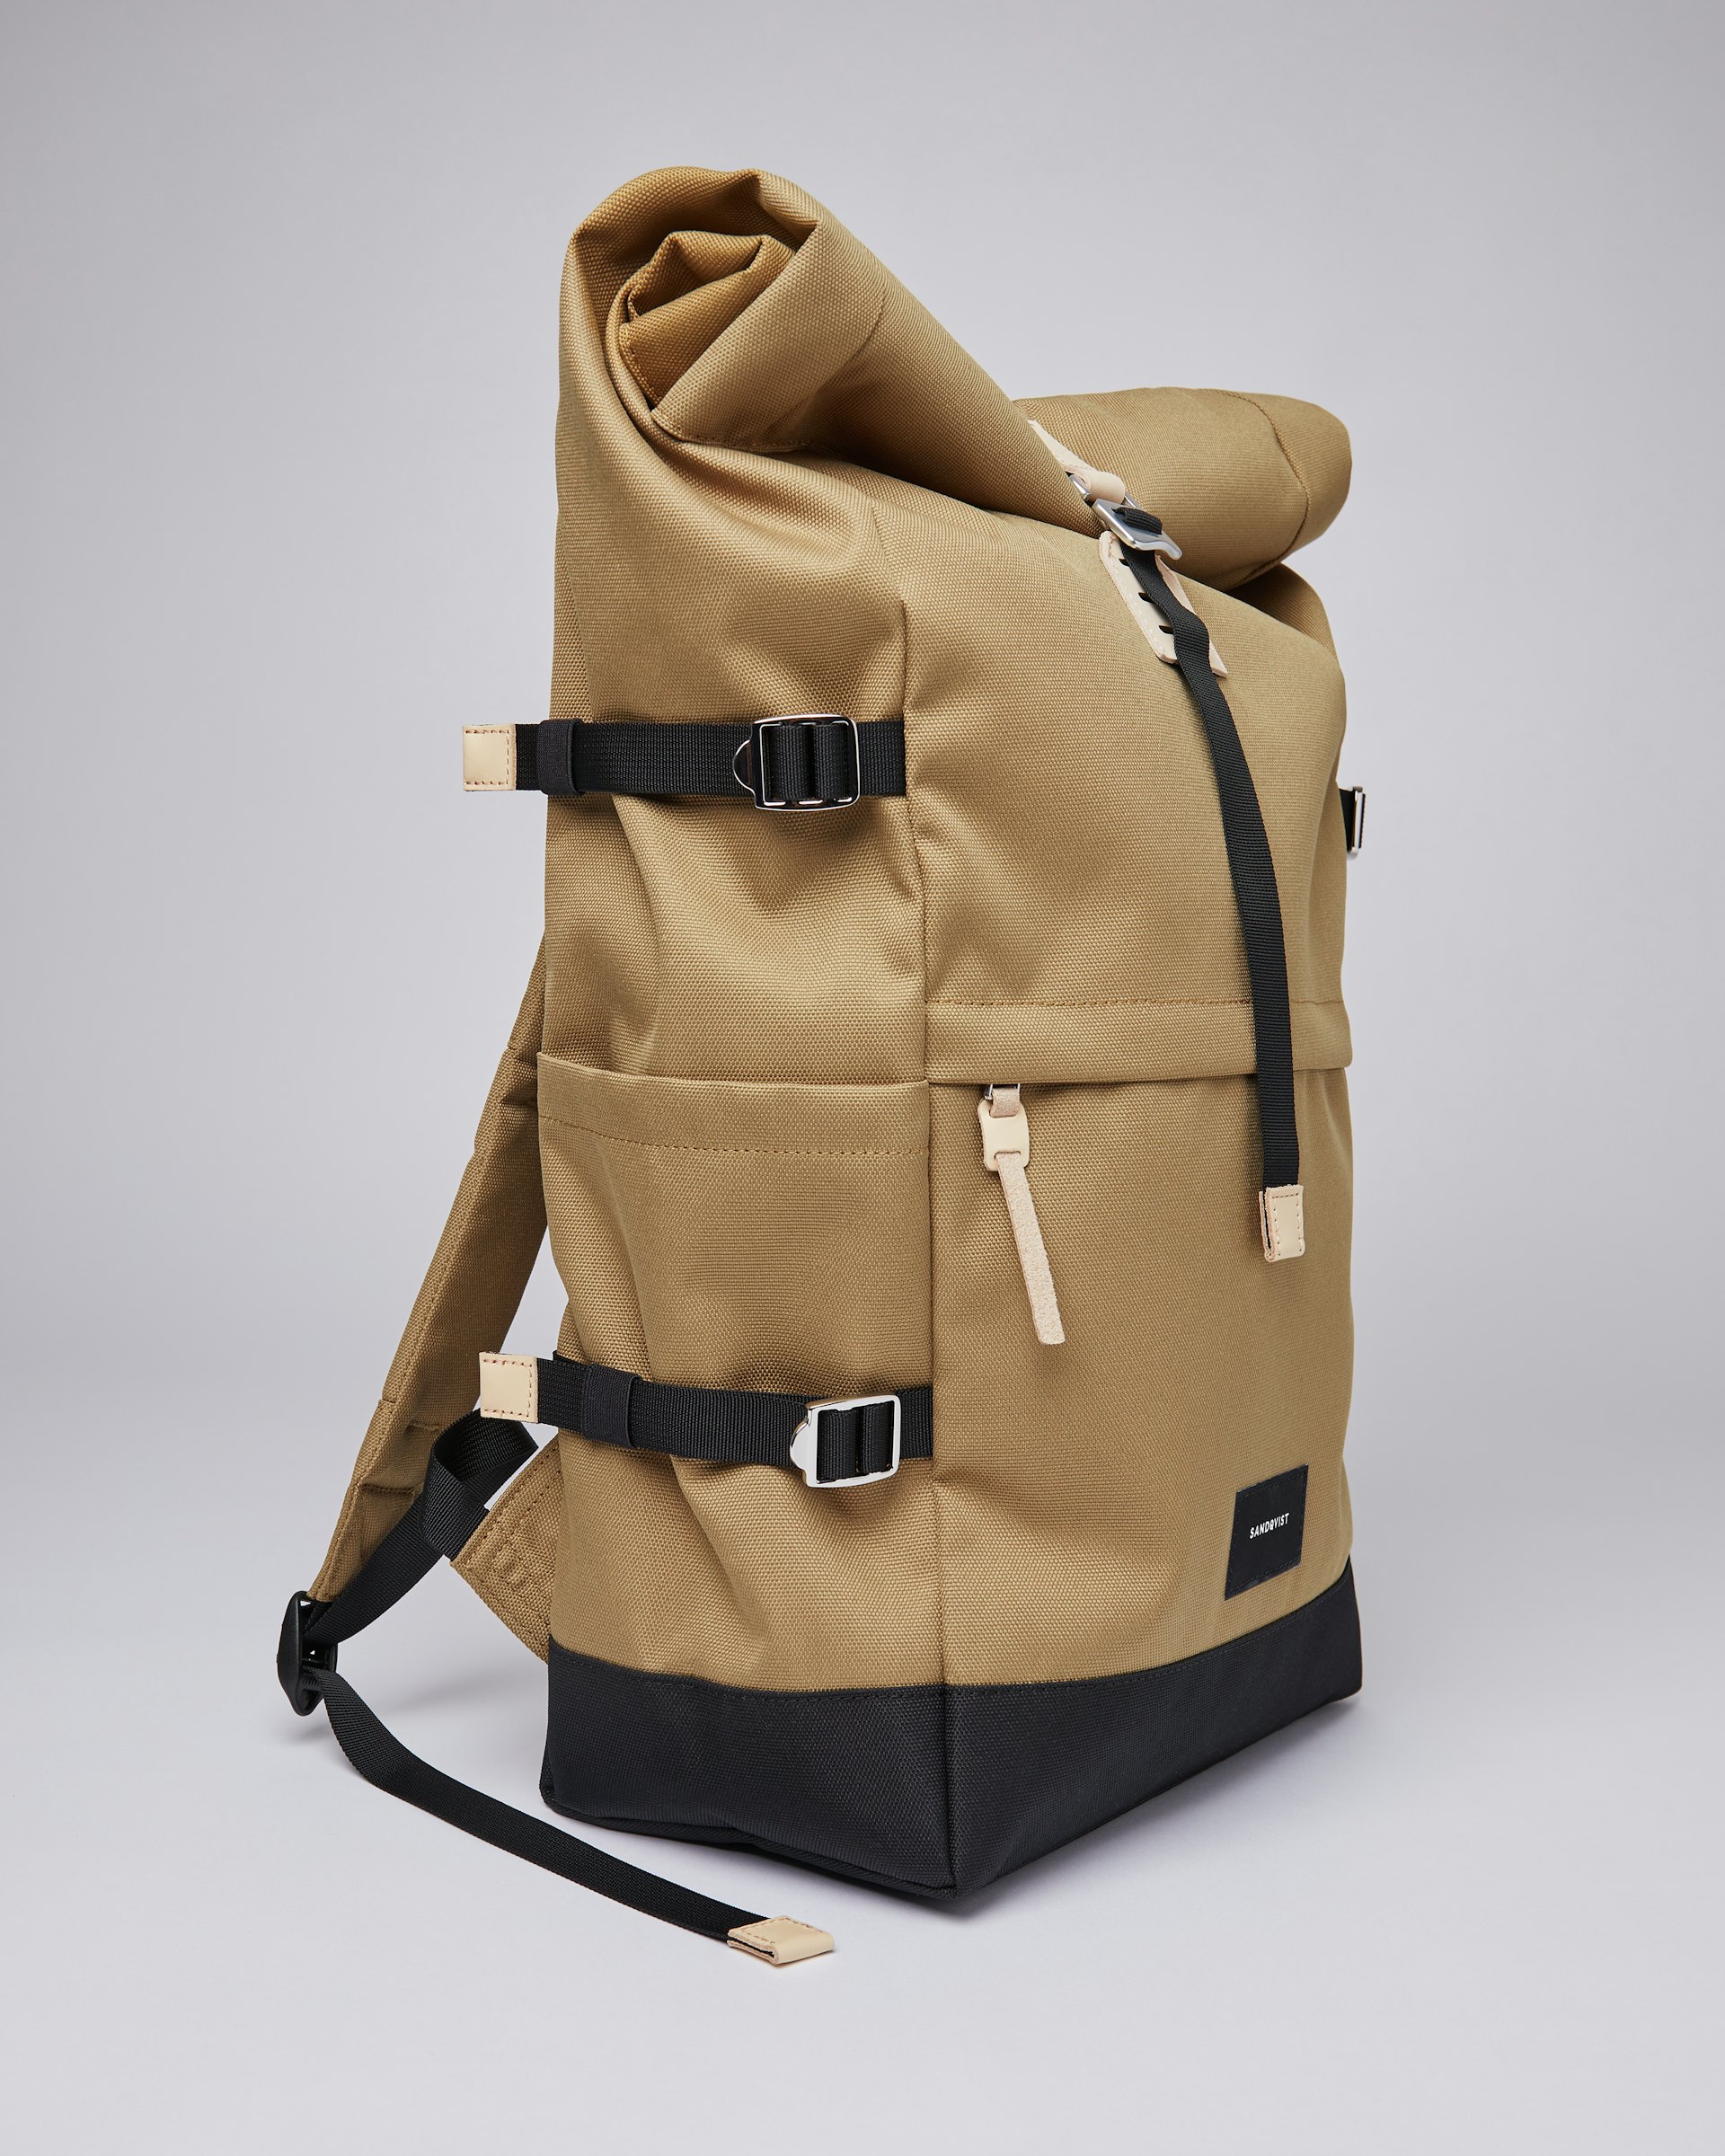 Bernt belongs to the category Backpacks and is in color bronze (4 of 7)